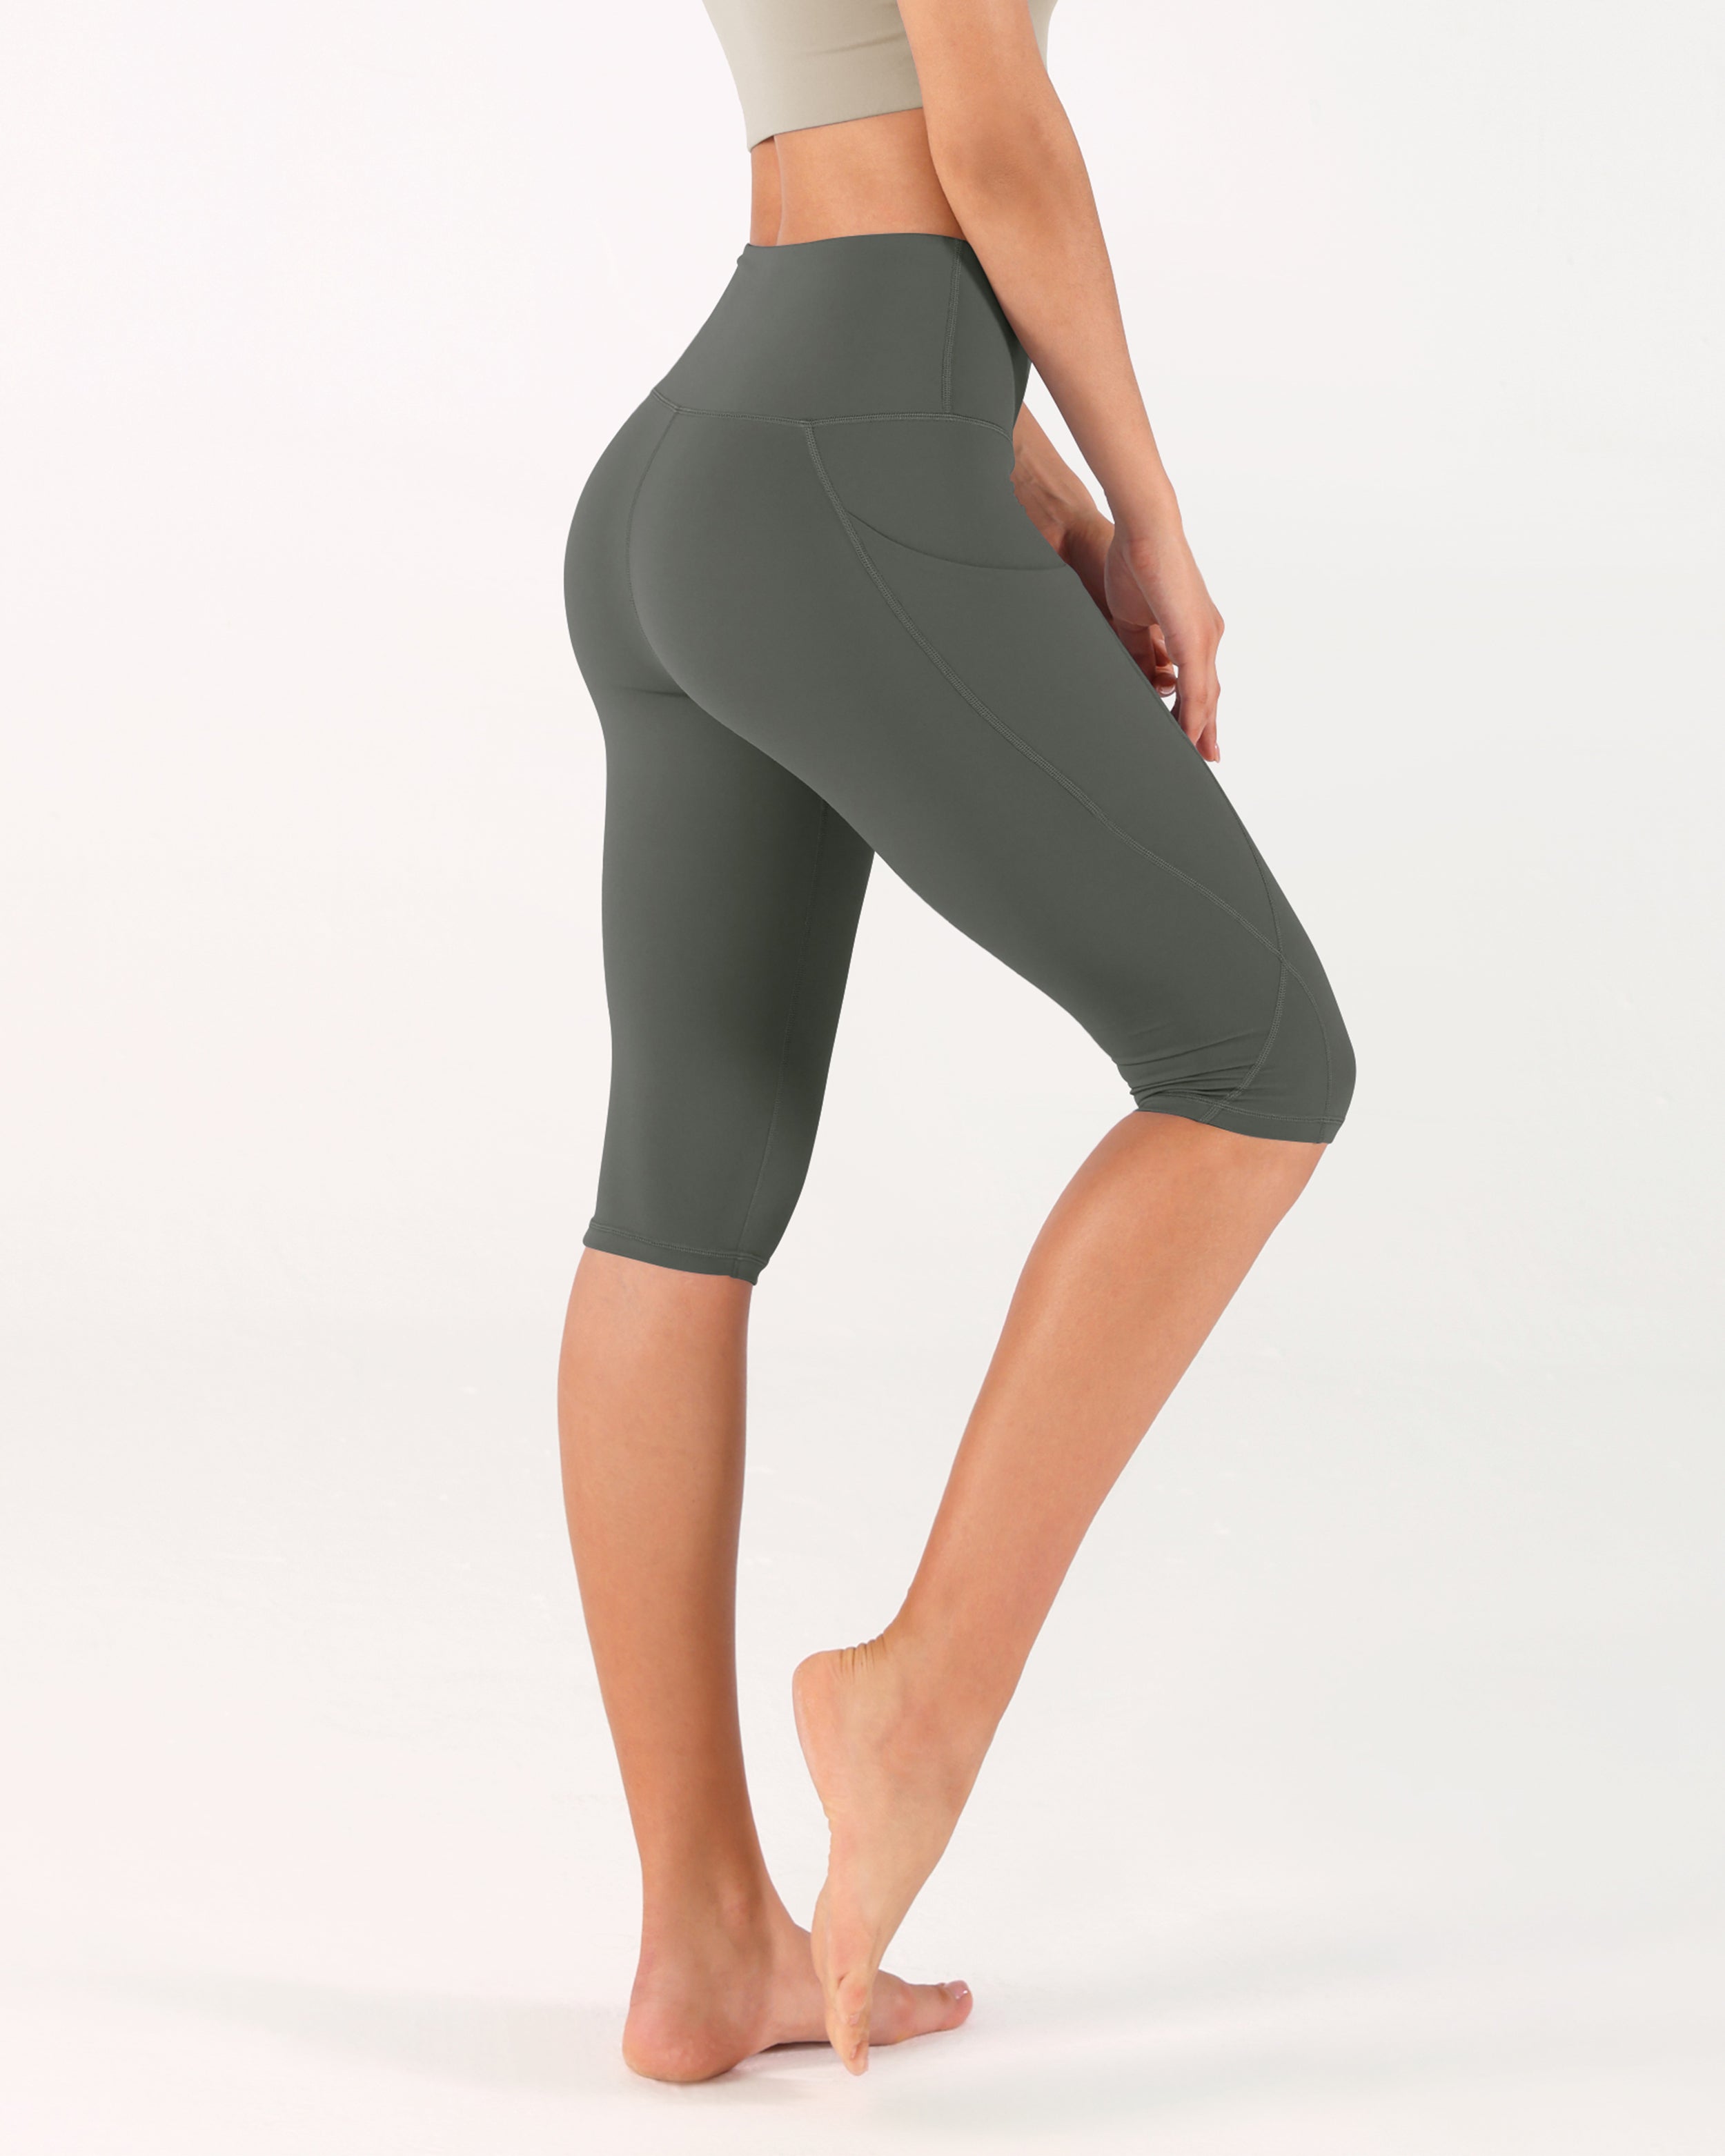 ODODOS High Waist Yoga Pants for Women with Pockets, India